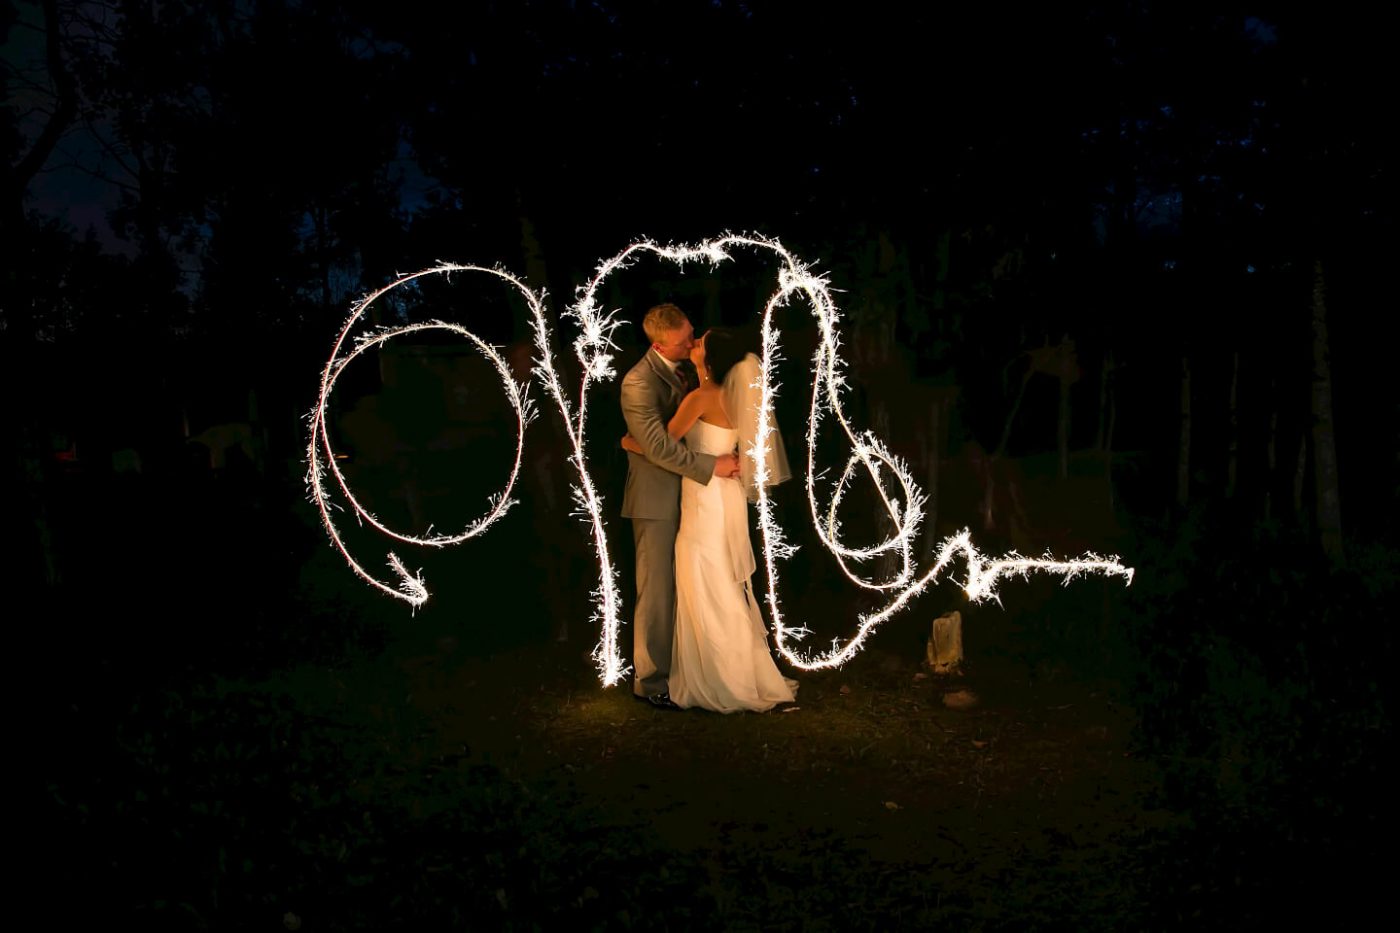 Kissing under the sparklers at Pineridge Hollow